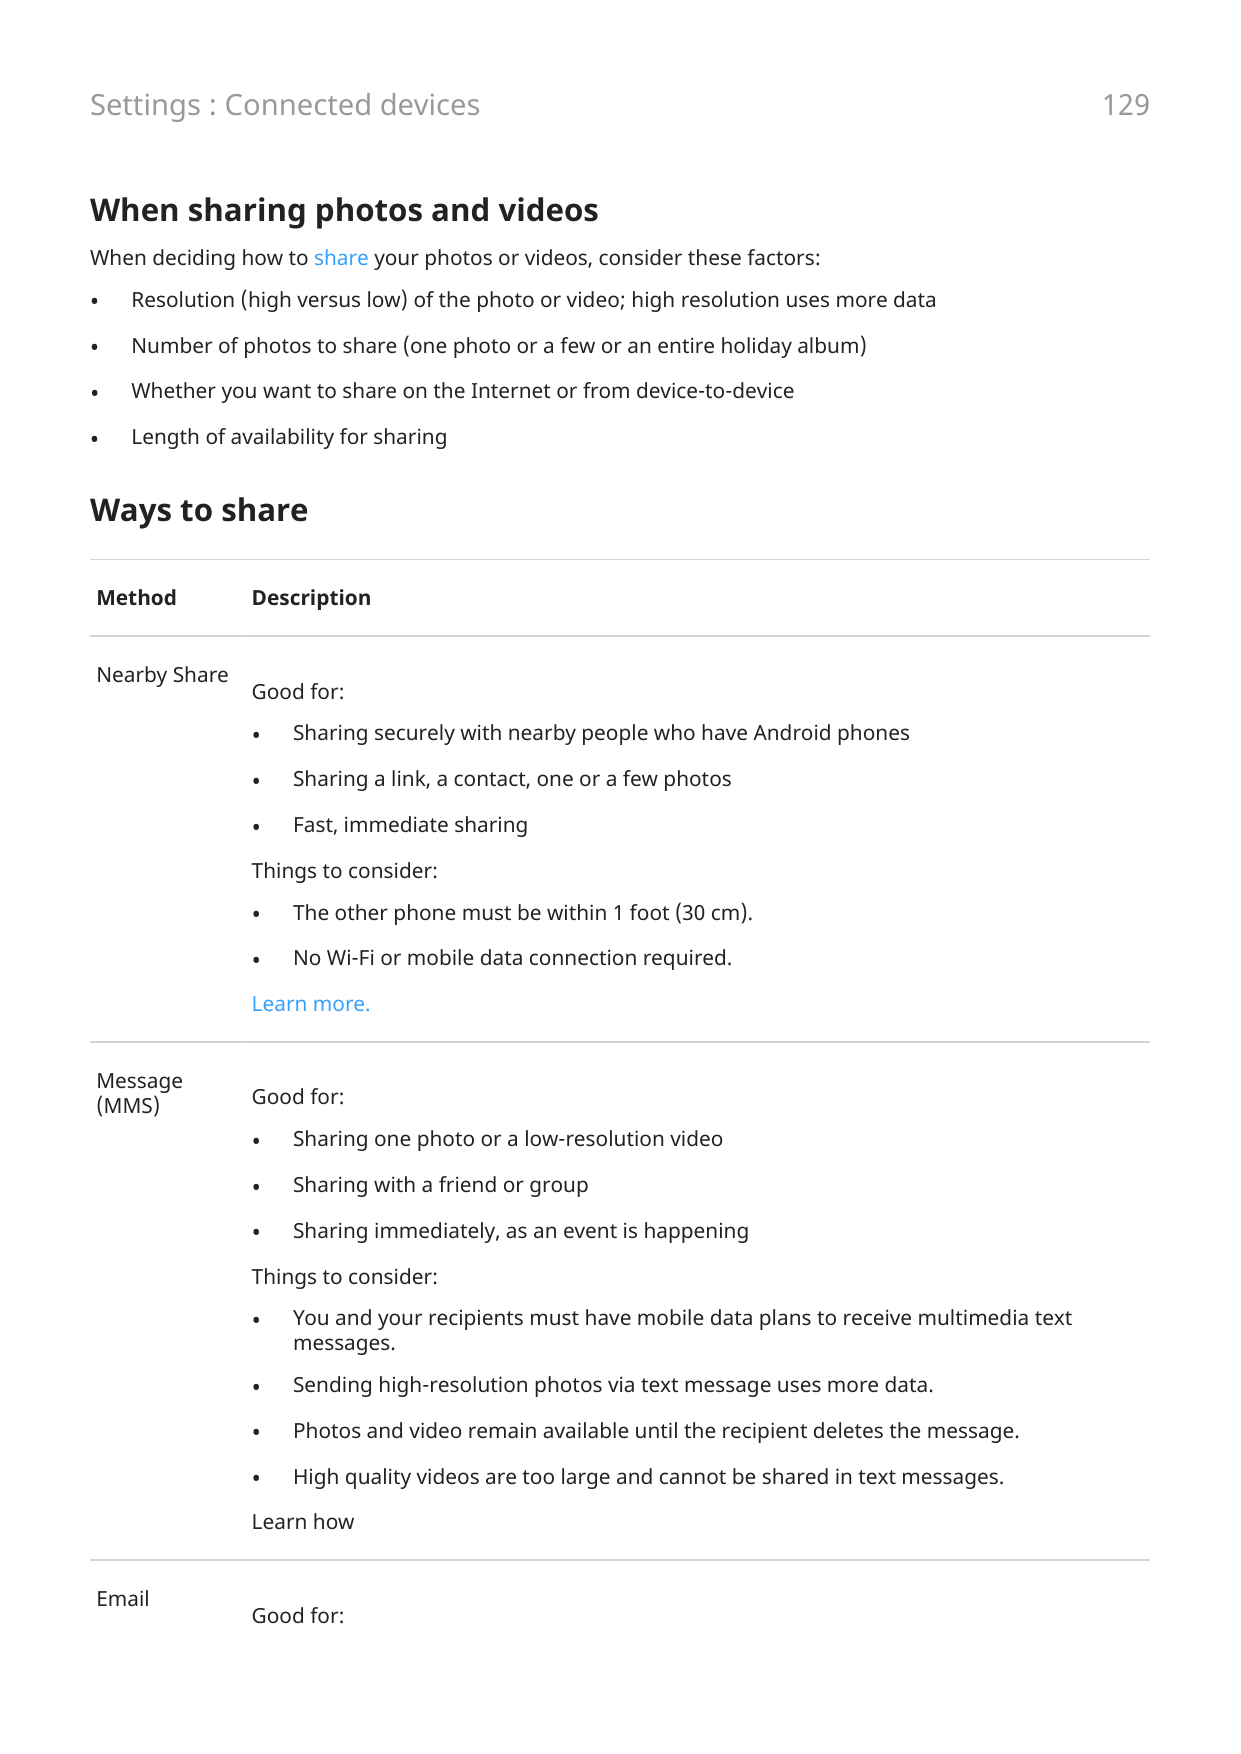 Settings : Connected devicesWhen sharing photos and videosWhen deciding how to share your photos or videos, consider these facto